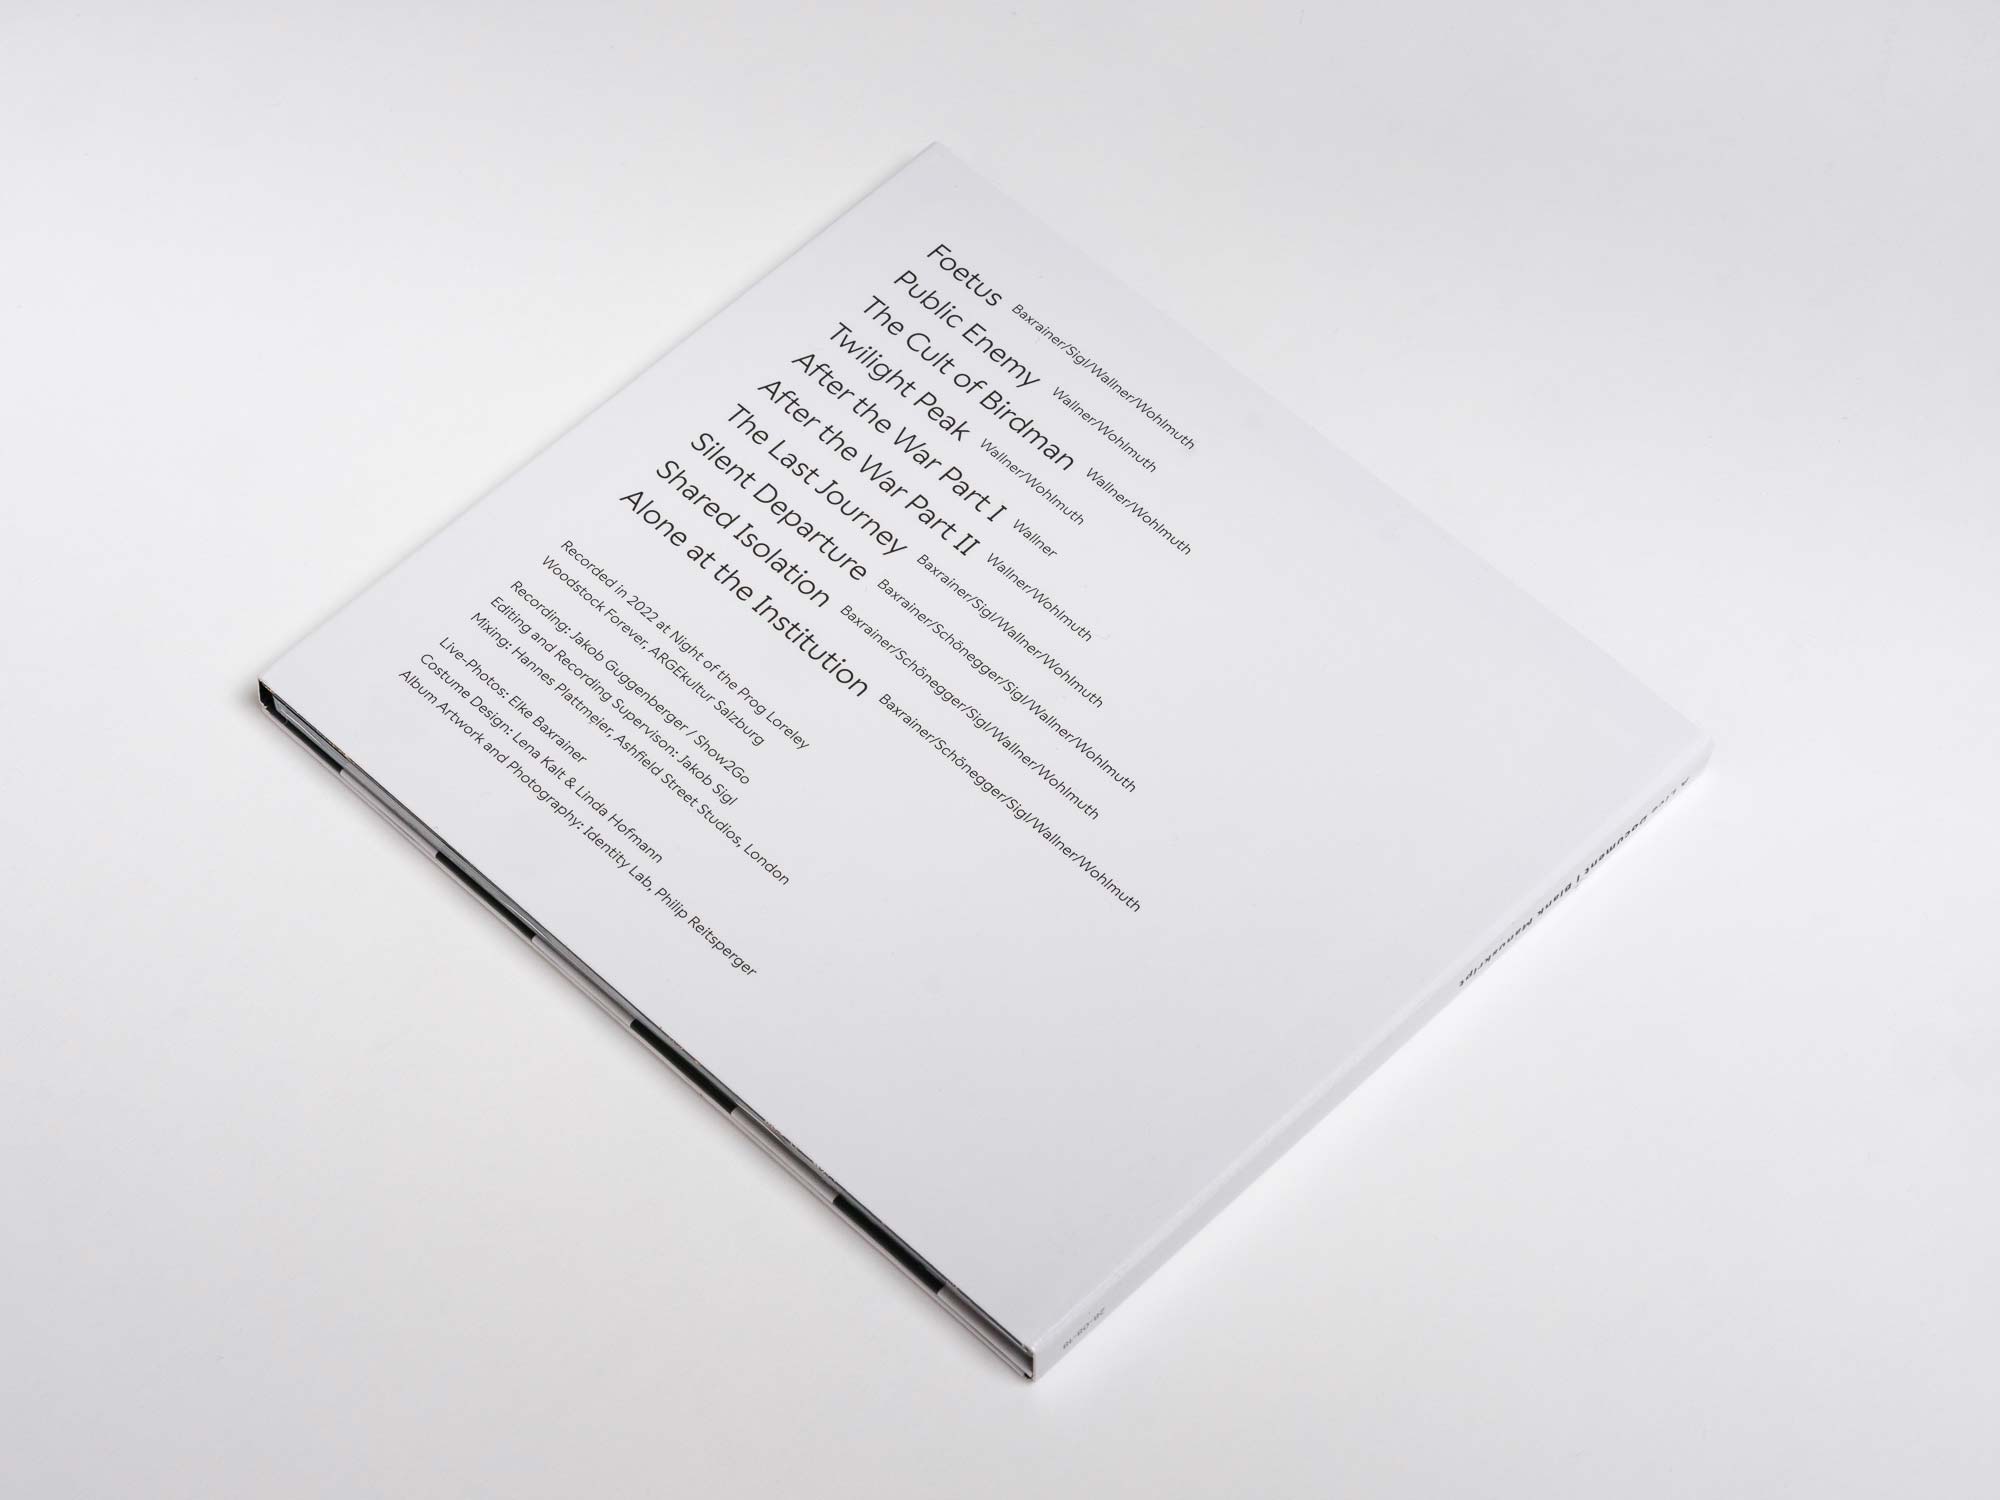 This photo shows the album artwork of the Blank Manuscript release "Live Document".